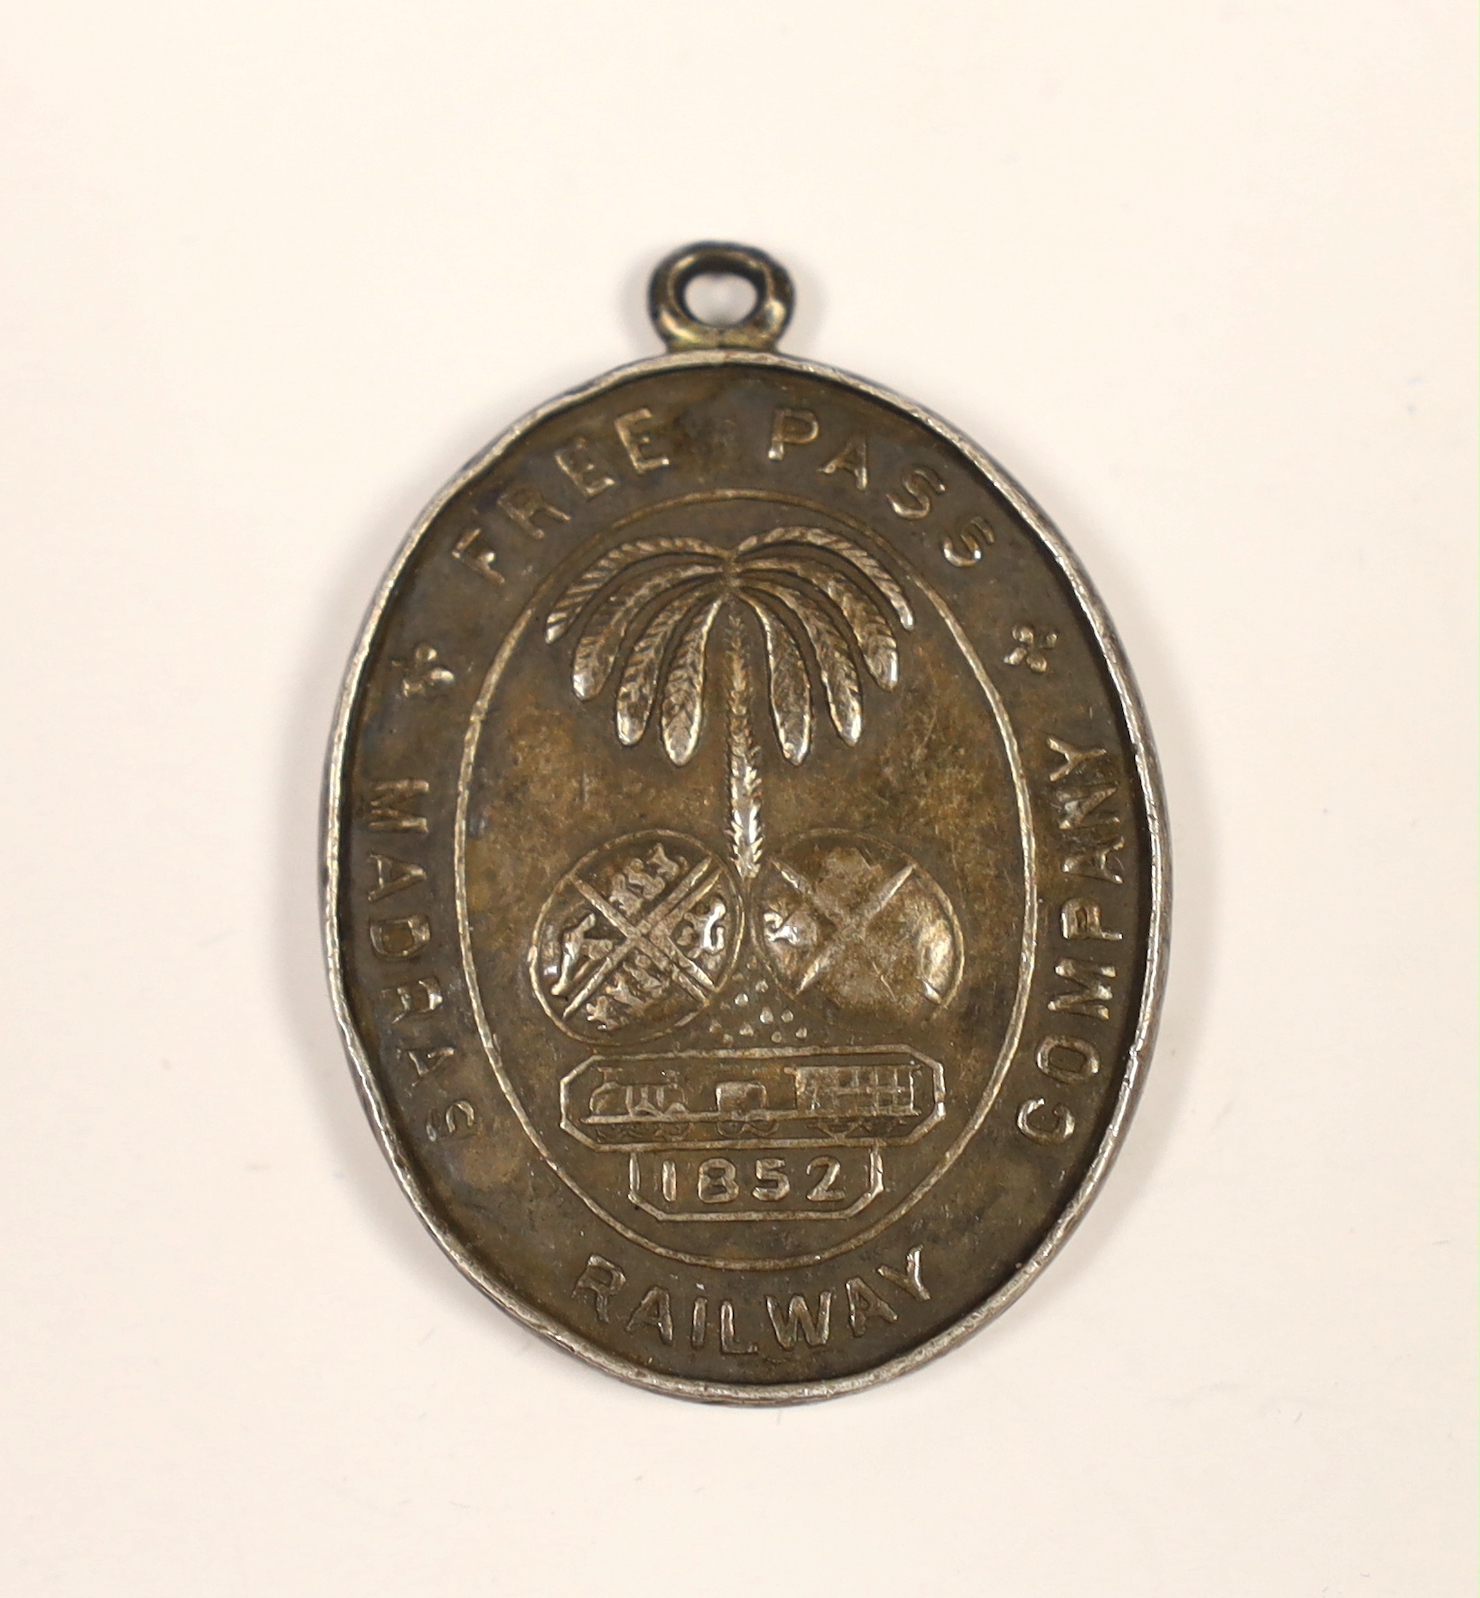 A scarce ‘Madras Railway Company free pass’ medallion, dated 1852, engraved ‘No125 ASST. TRAFFIC